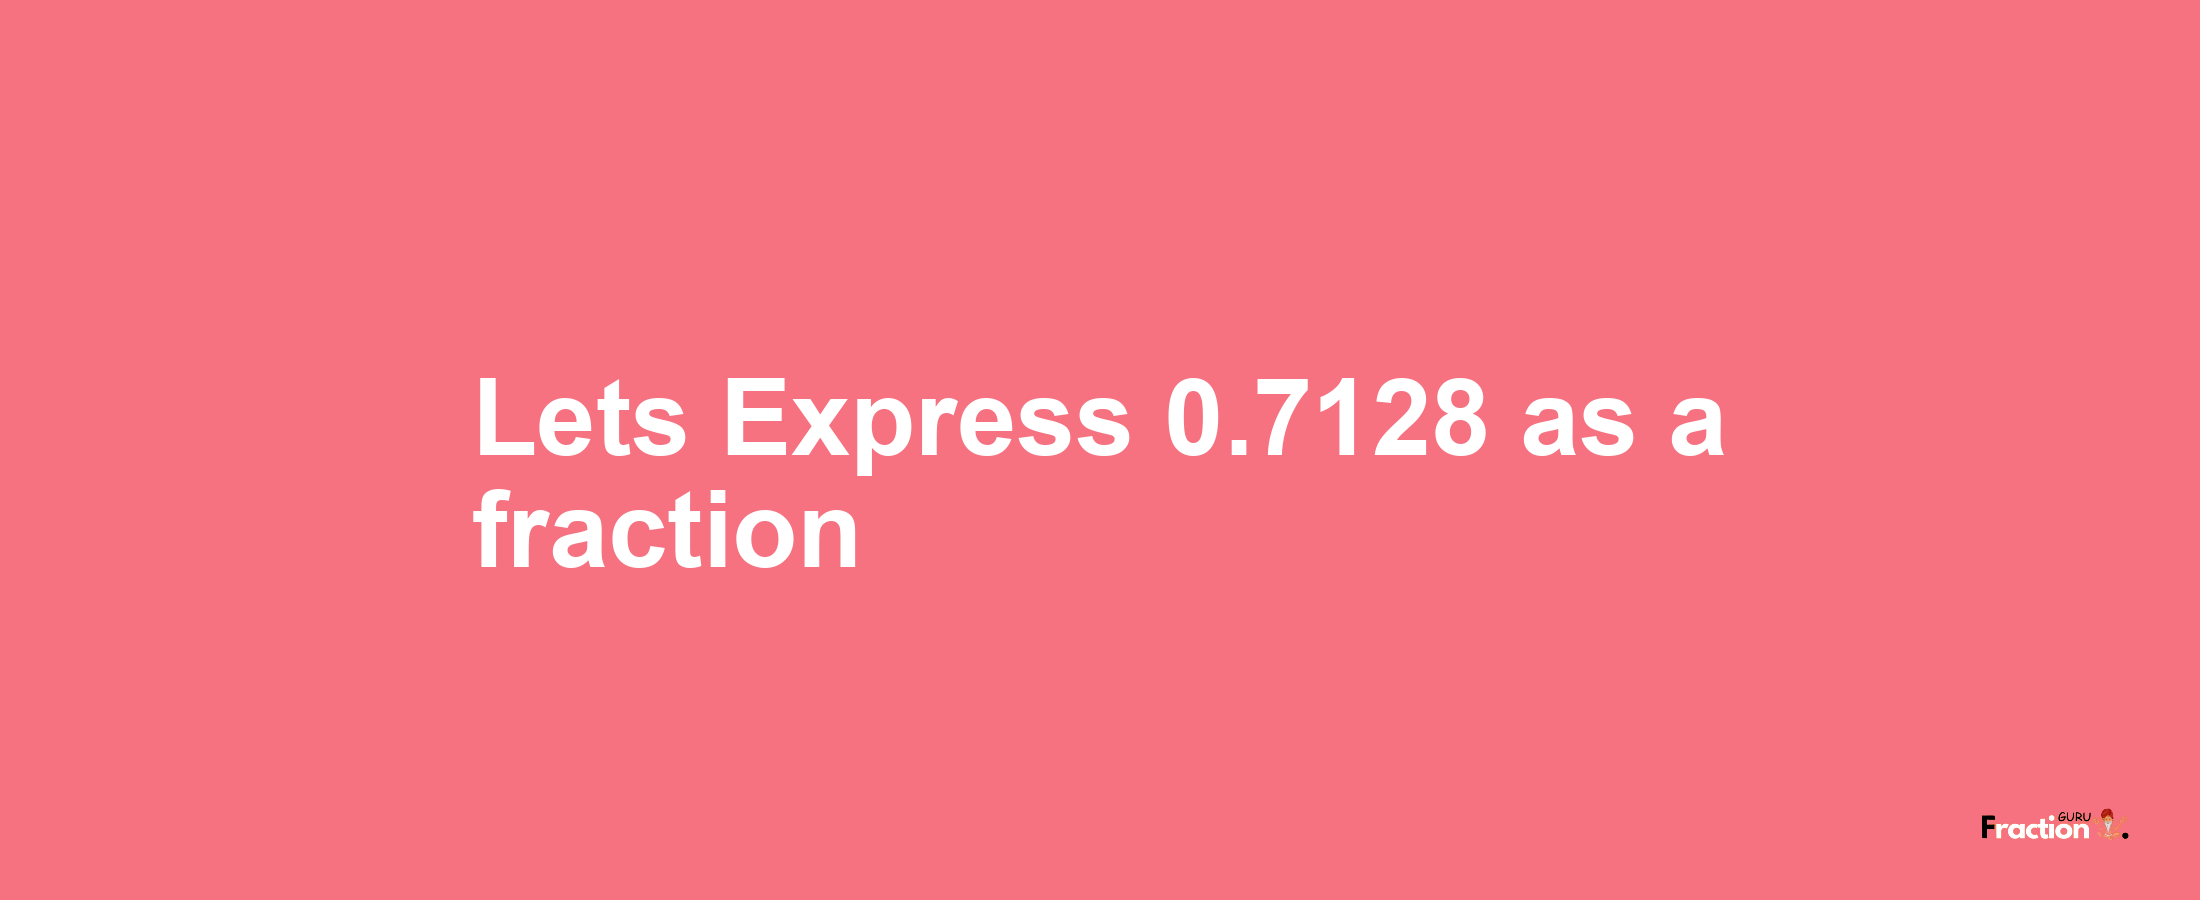 Lets Express 0.7128 as afraction